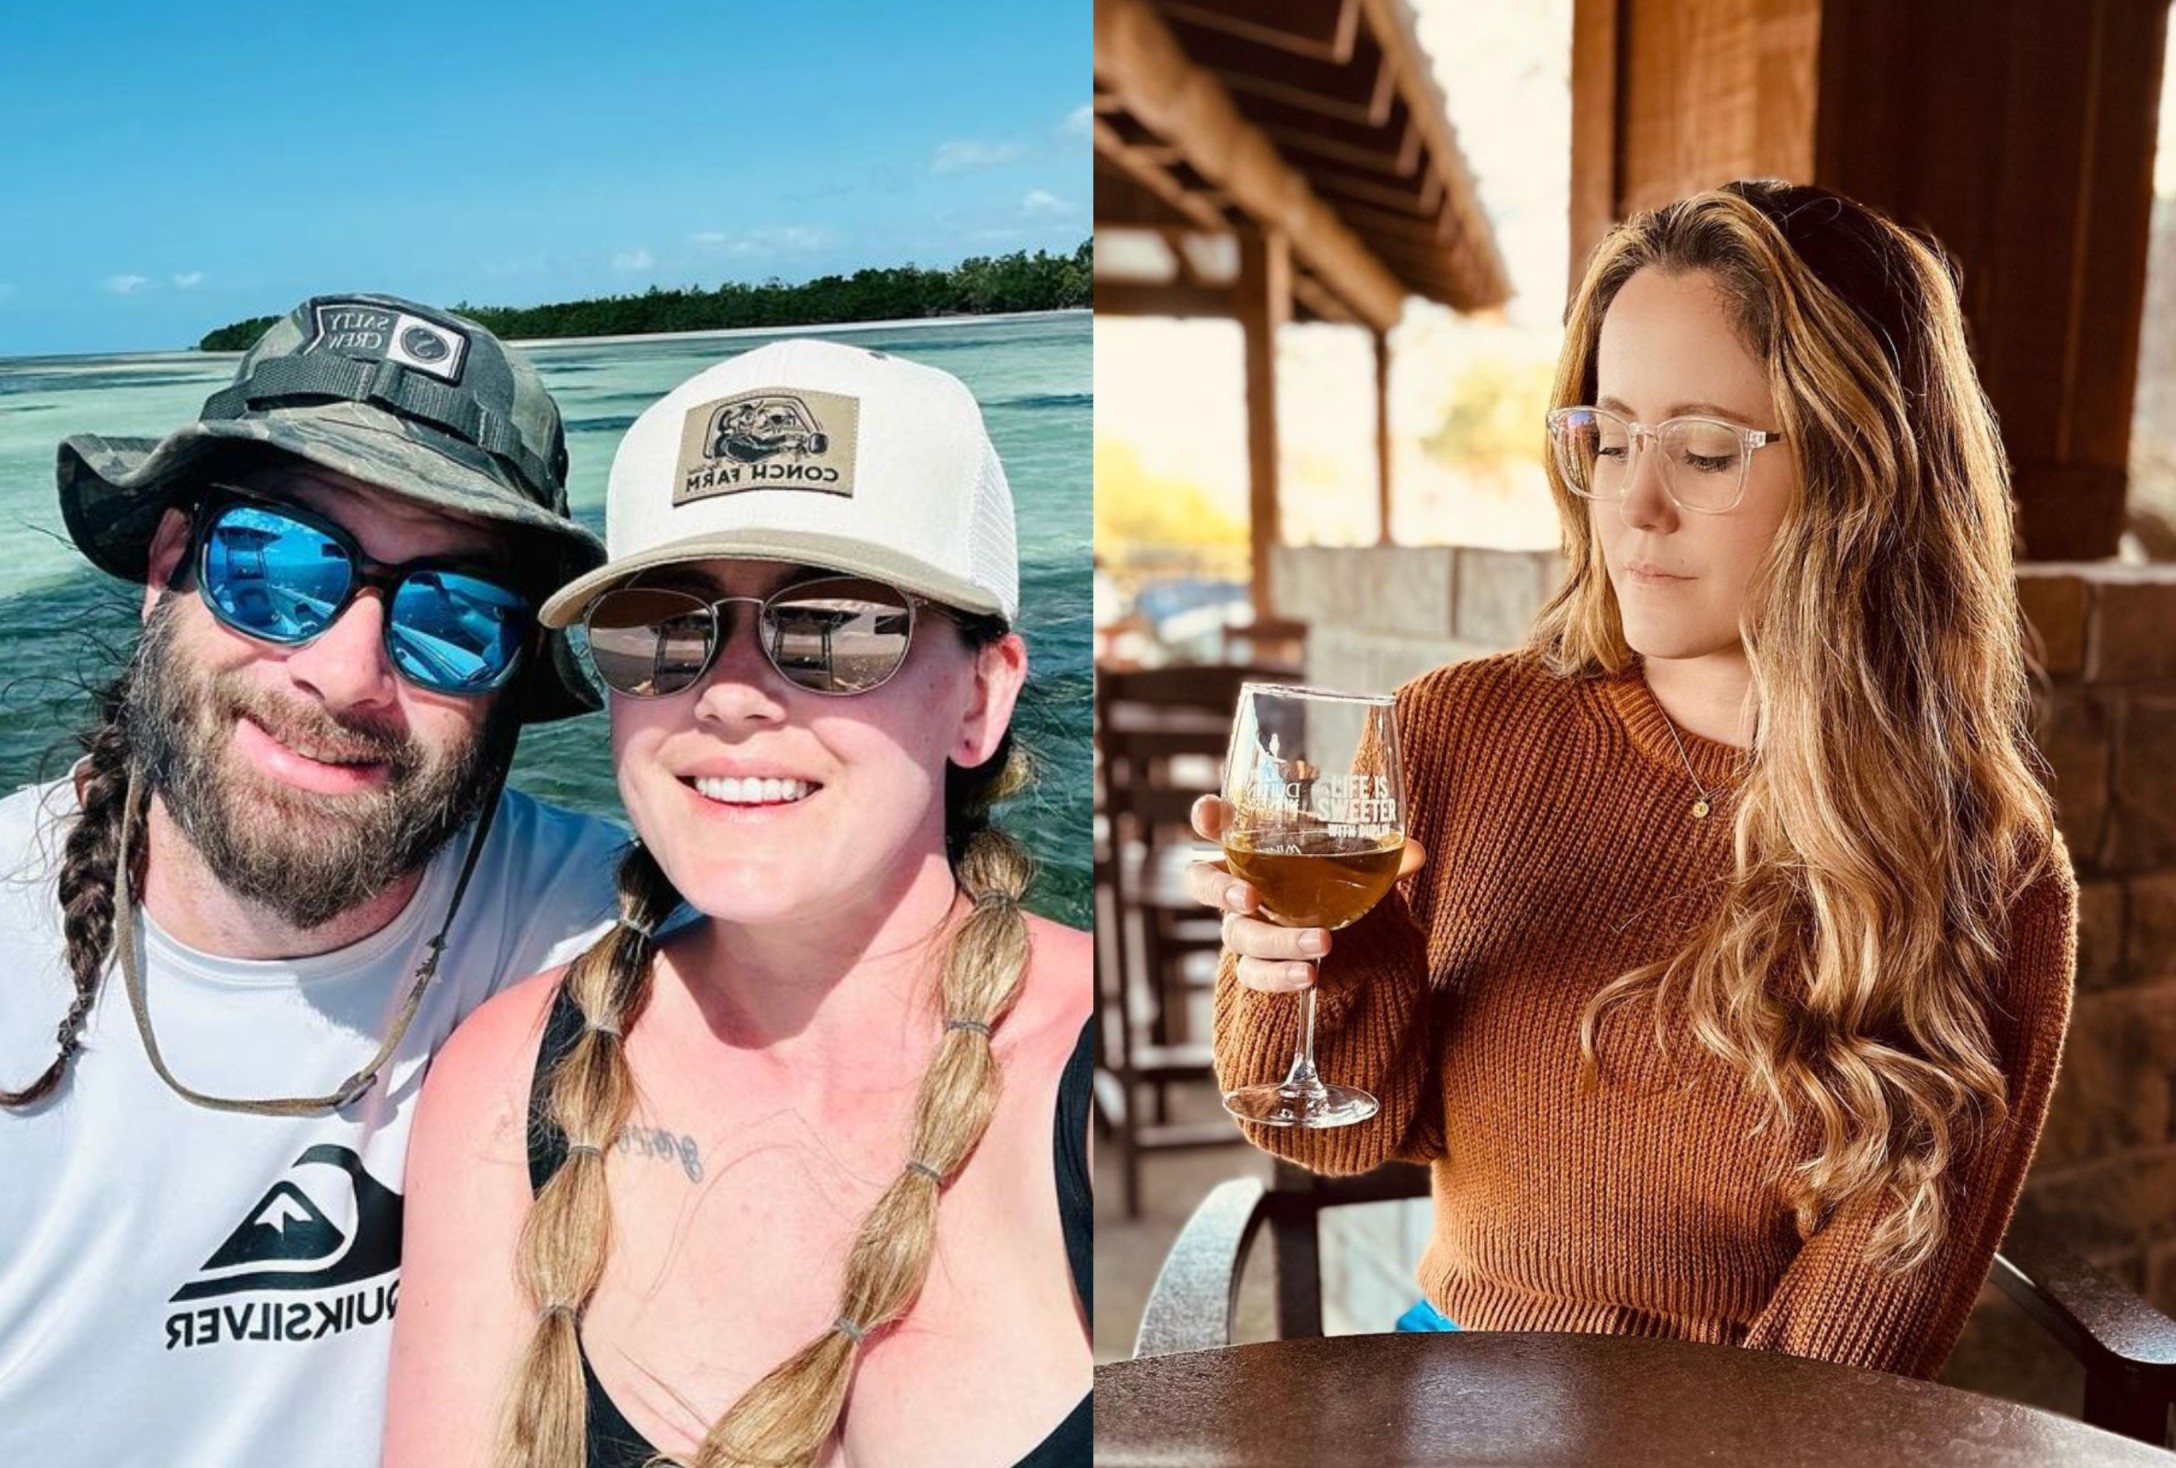 Teen Mom Star Jenelle Evans Says Shes Stuck in Her Marriage to David Eason CafeMom image picture